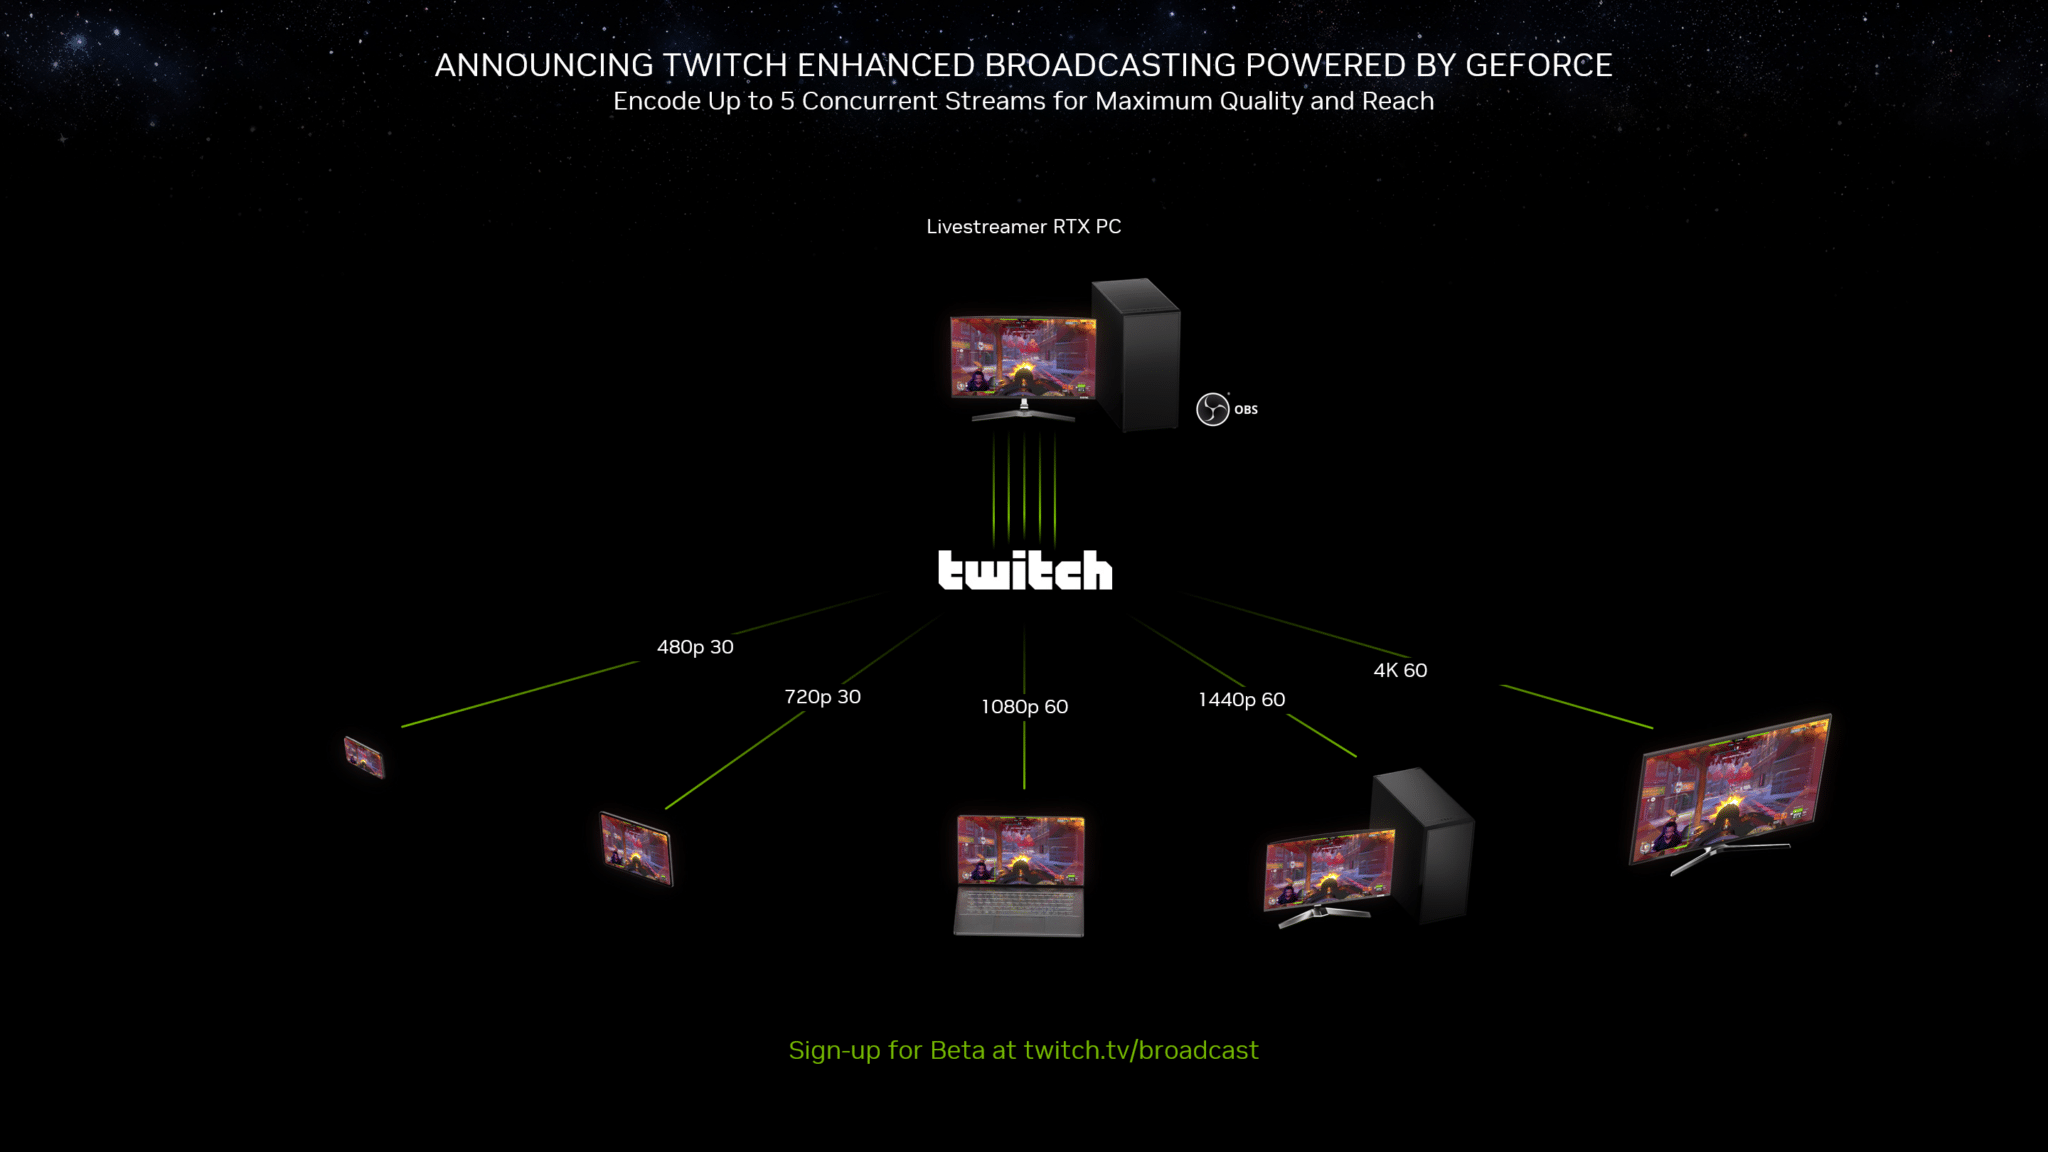 OBS encoding enhancements come to Nvidia's Maxwell GPUs — GeForce GTX 900 series can now leverage the Twitch Enhanced Broadcasting feature